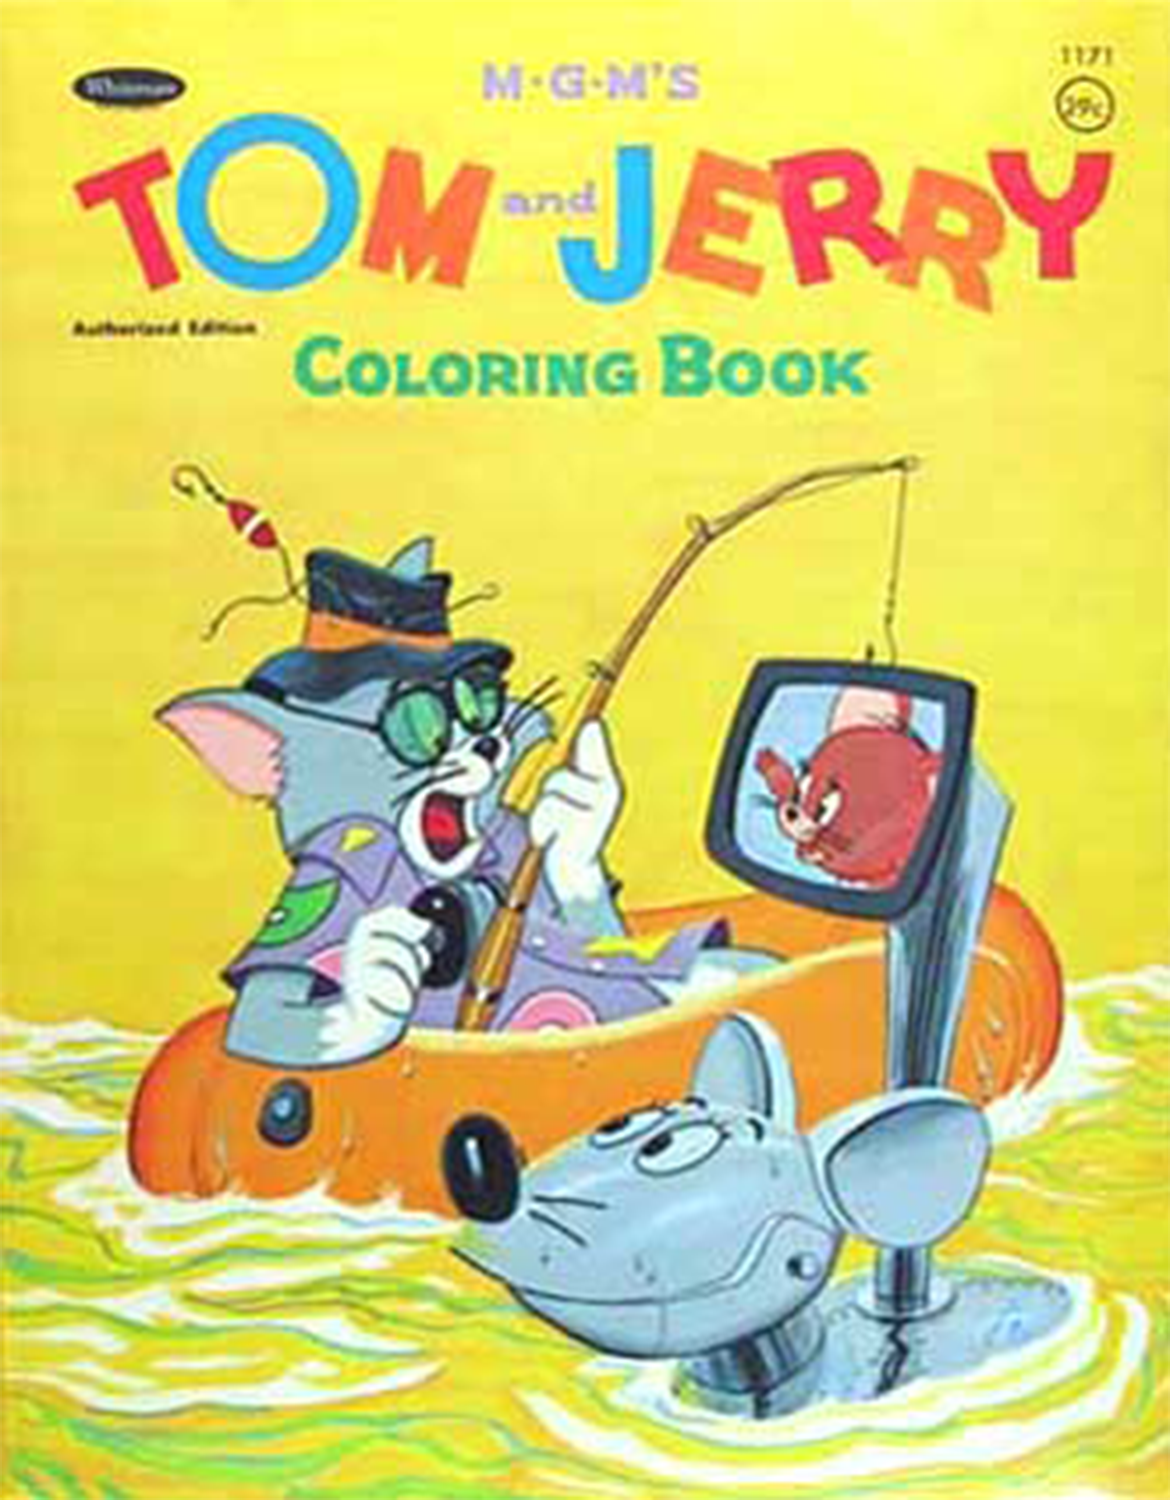 Mgms tom and jerry